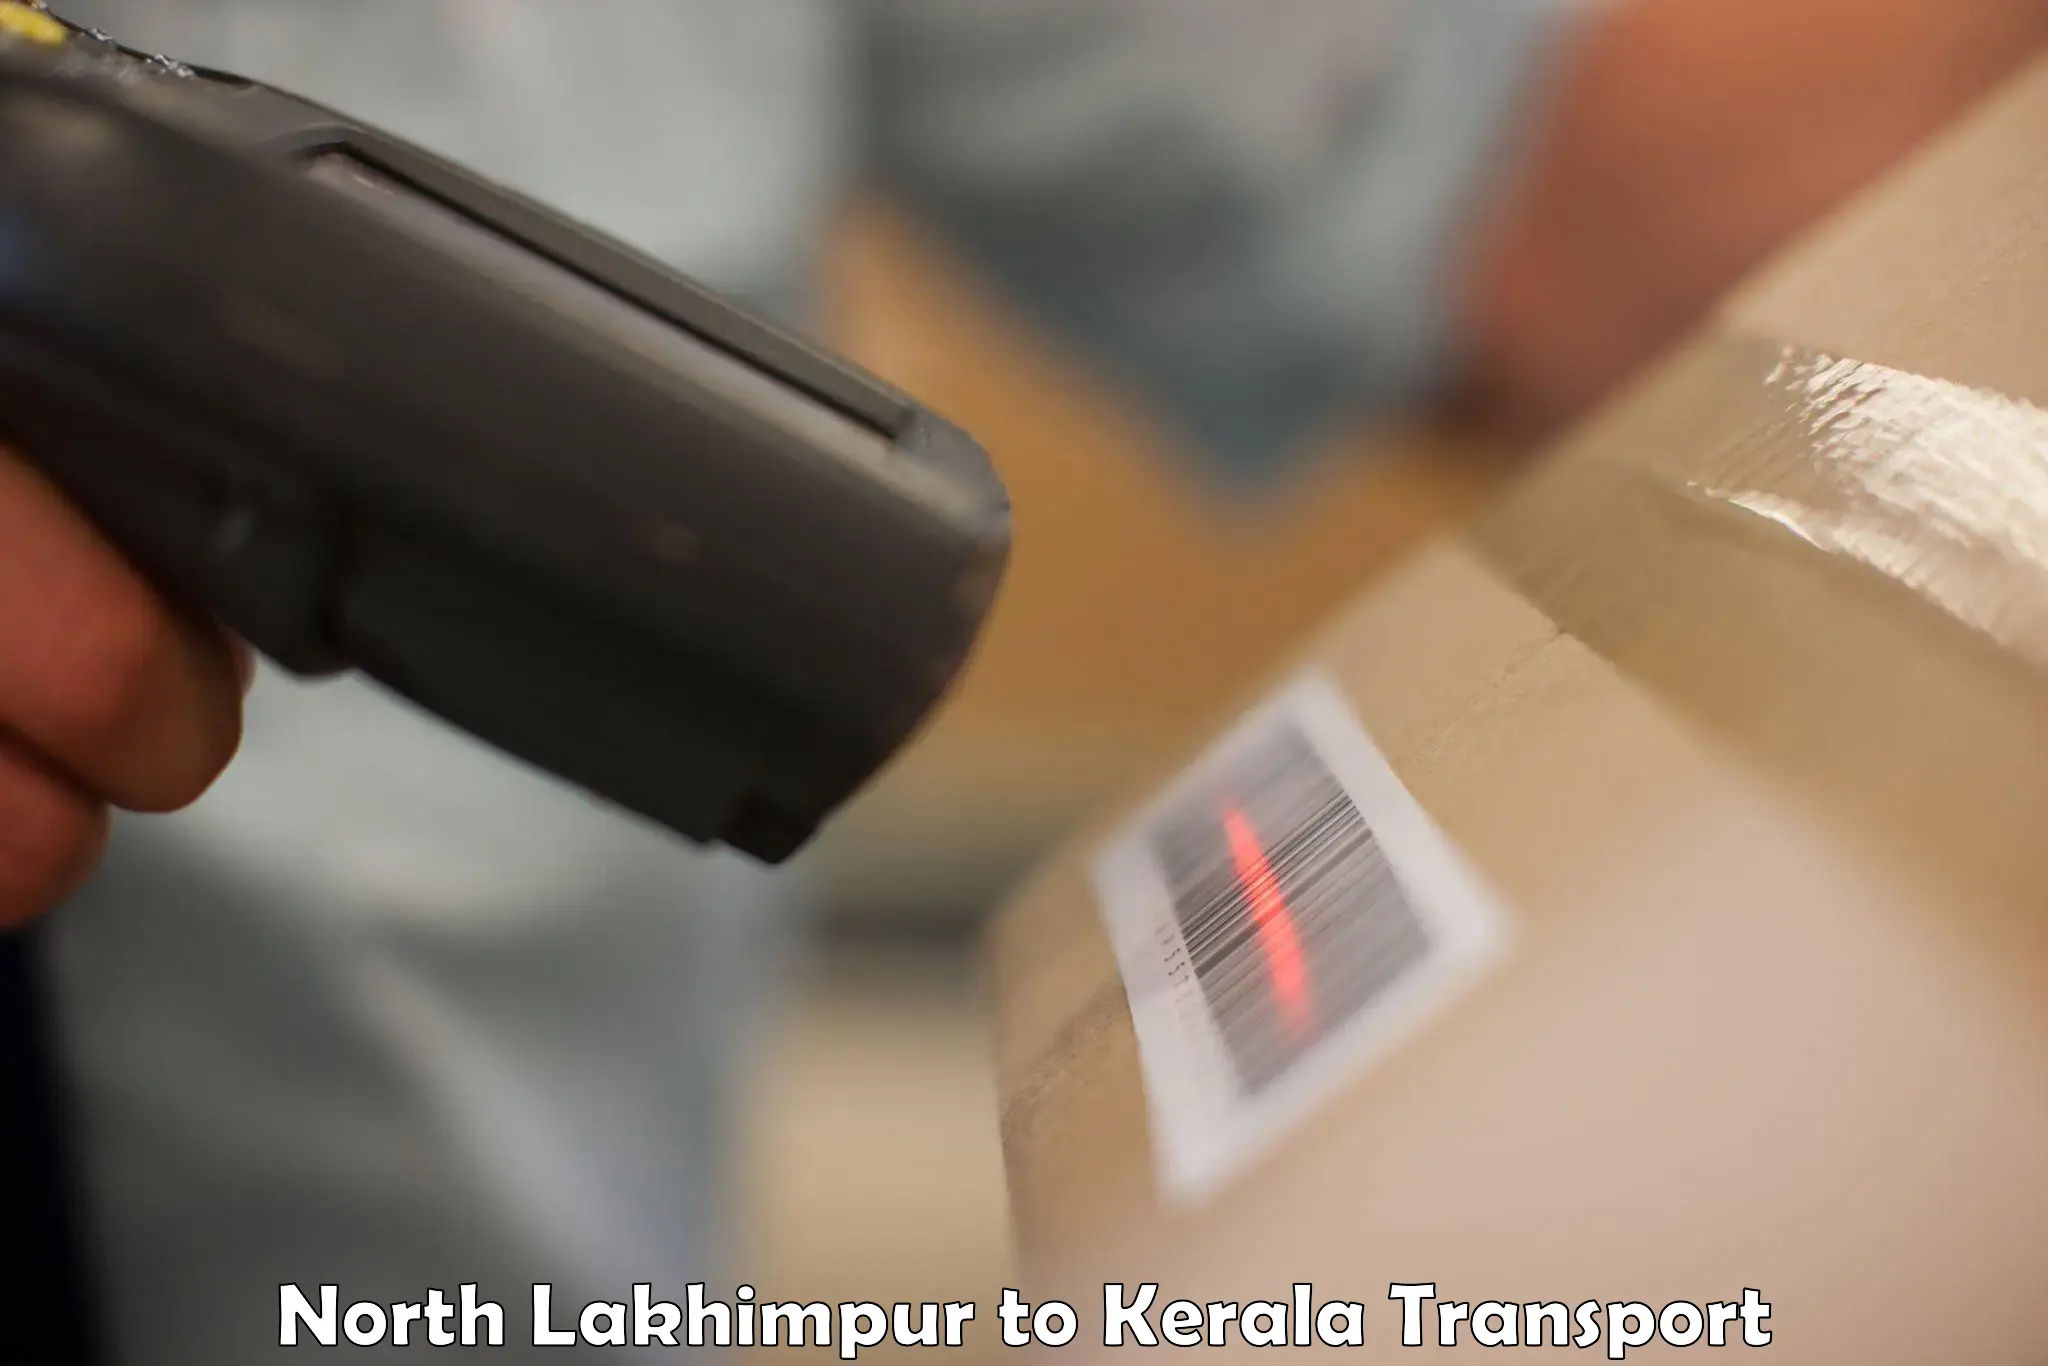 Air freight transport services in North Lakhimpur to Chungatra